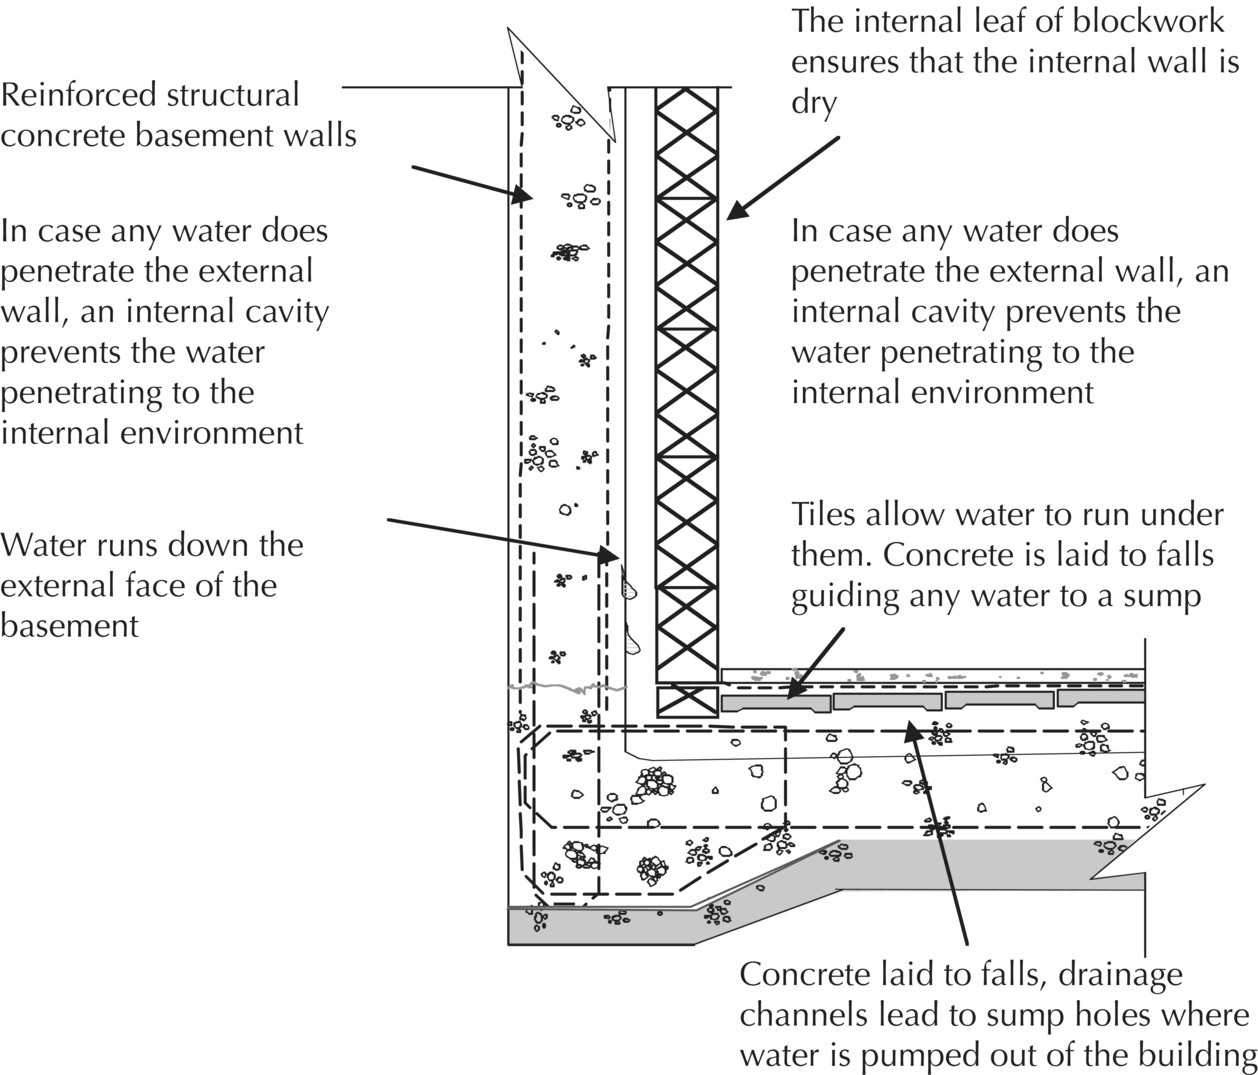 Diagram of traditional drained cavity basement (type C) with arrows indicating the internal leaf of blockwork ensures that the internal wall is dry, water runs down the external face of the basement, etc.